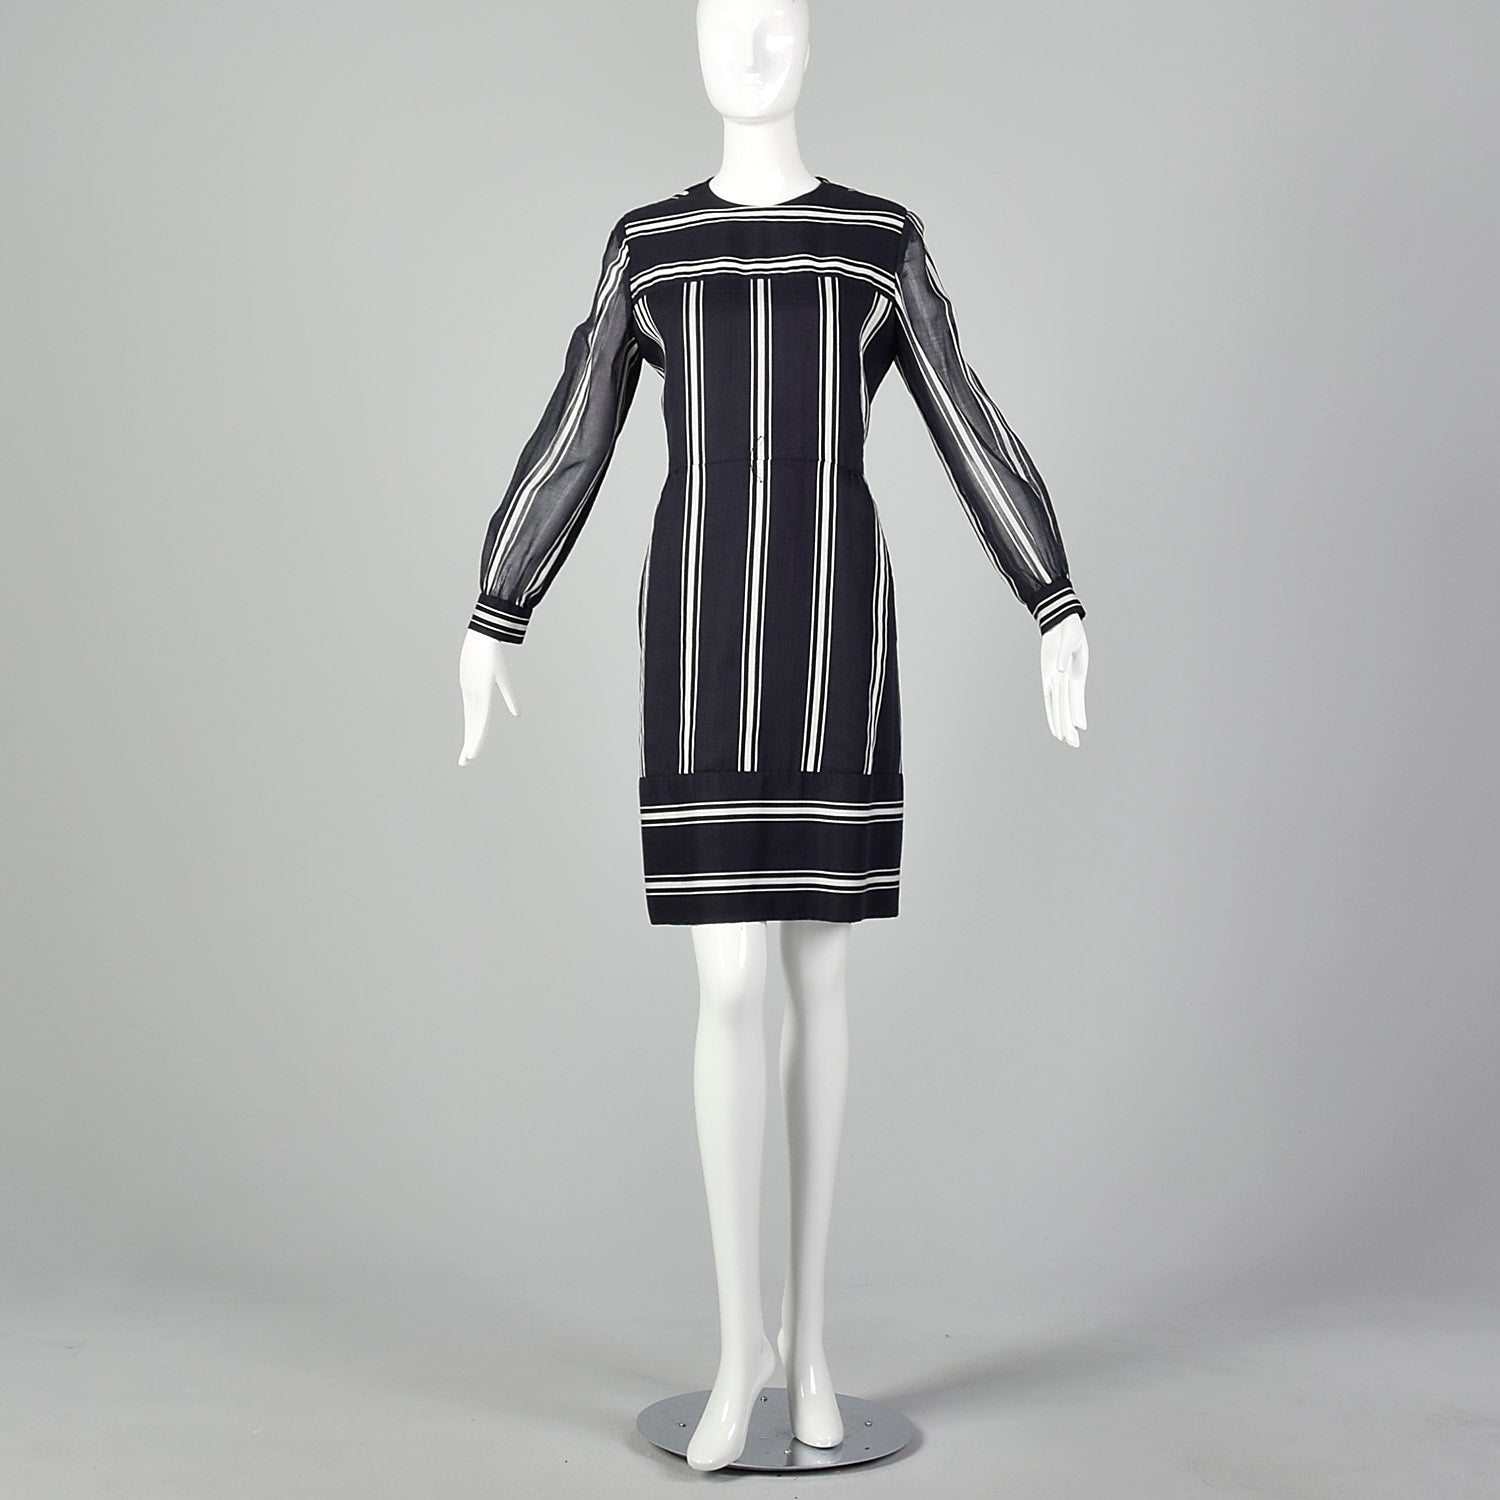 Large Suzy Perette Navy and White Striped Dress